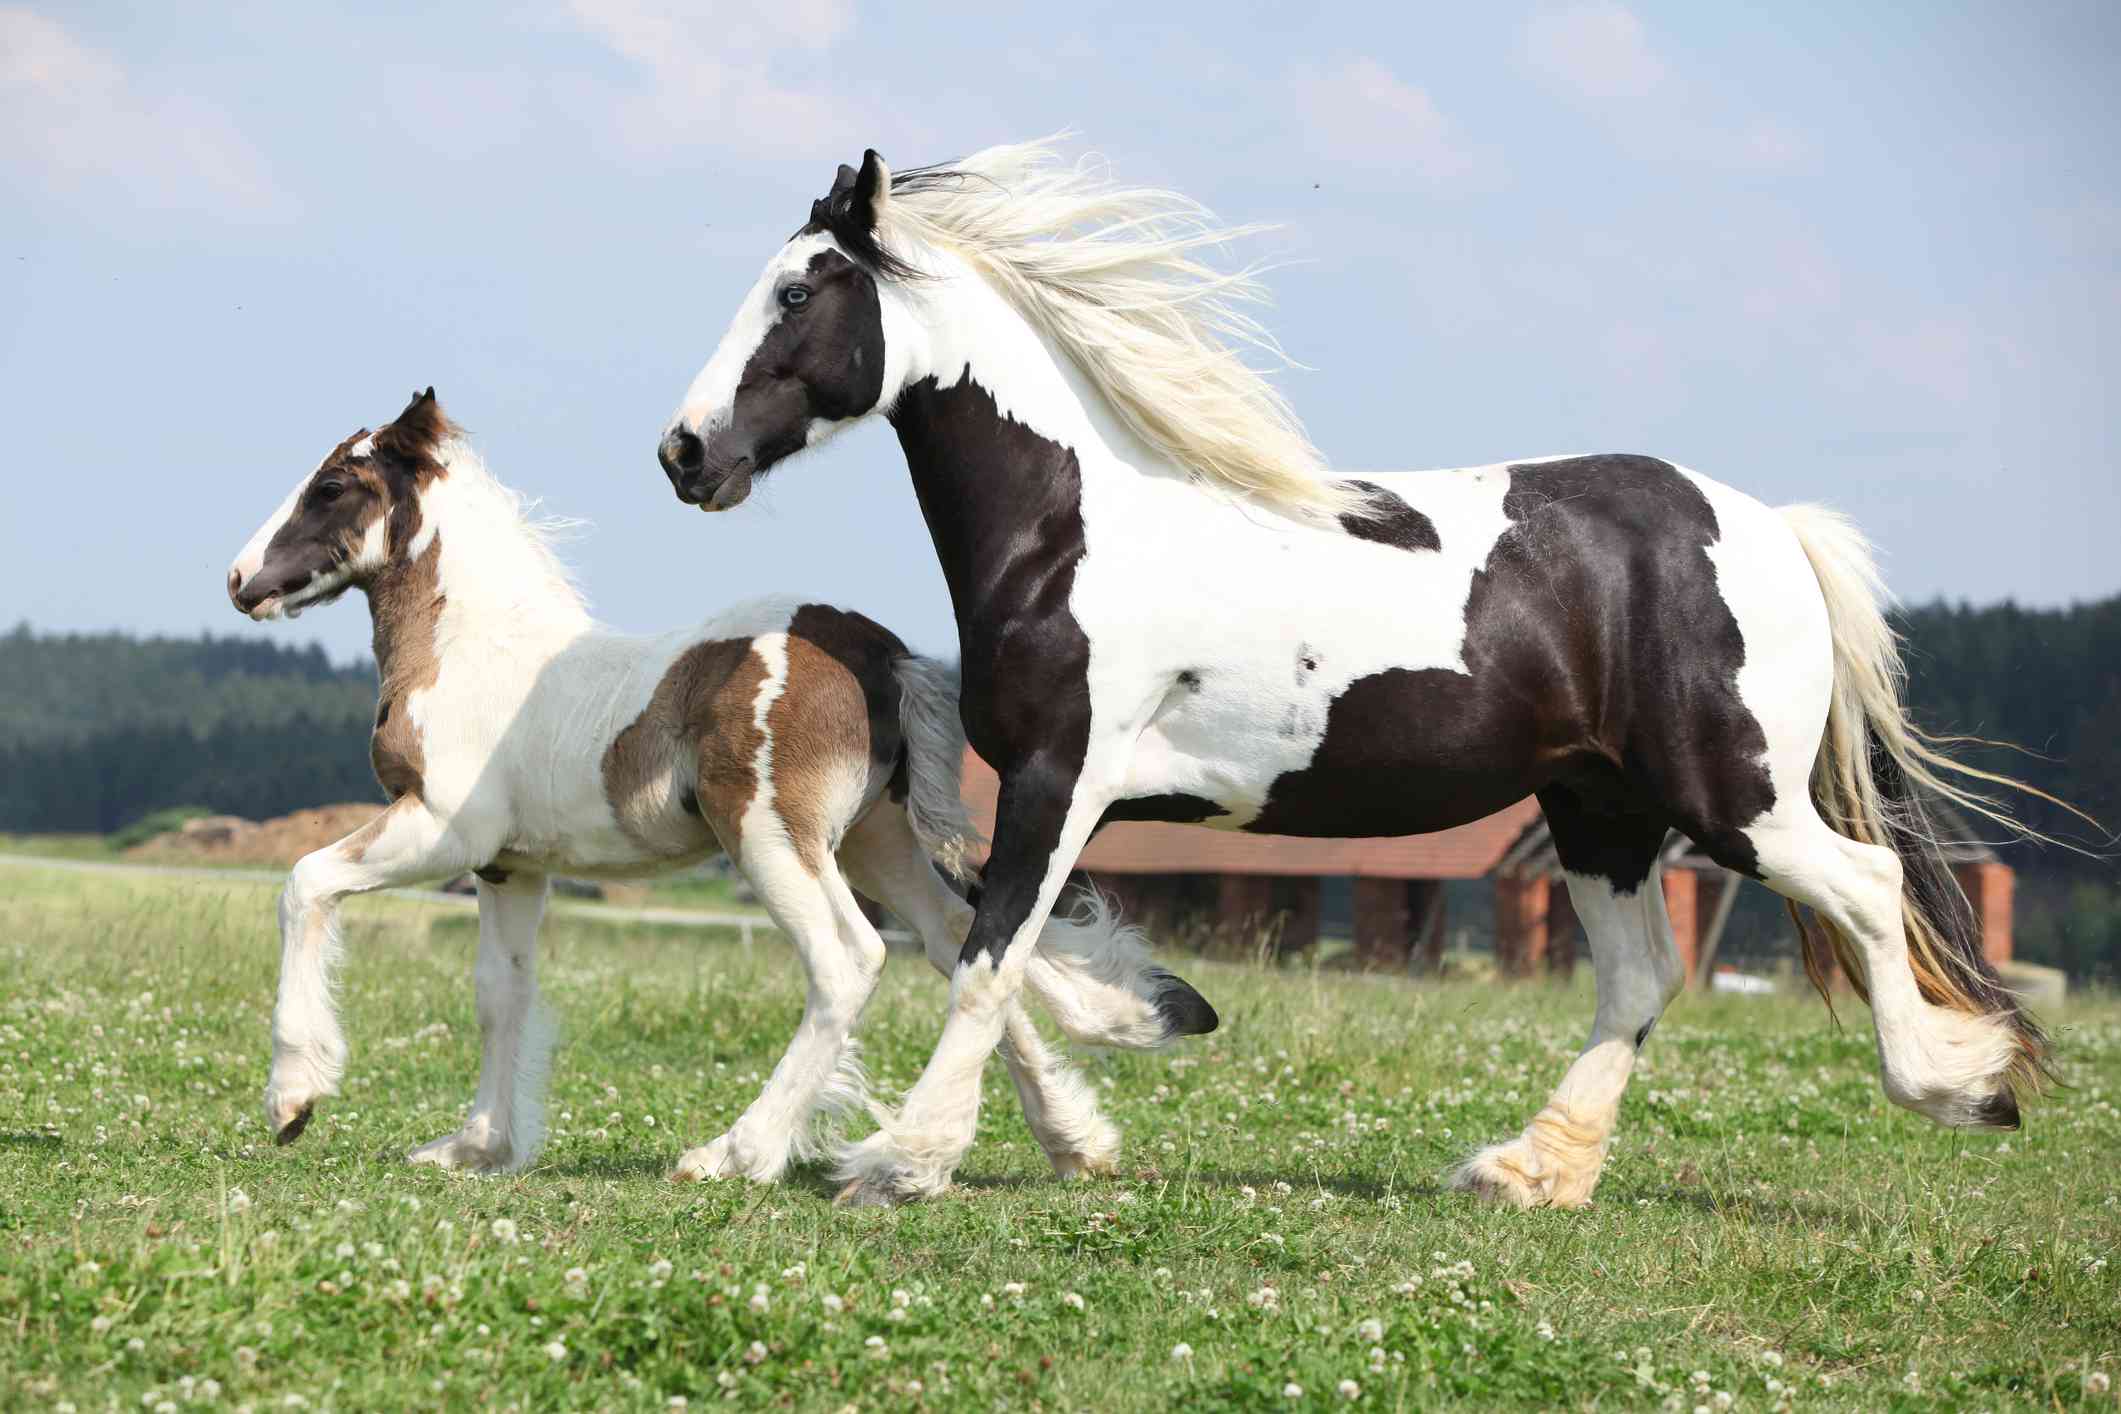 Gypsy Vanner mare and foal trotting in the pasture.